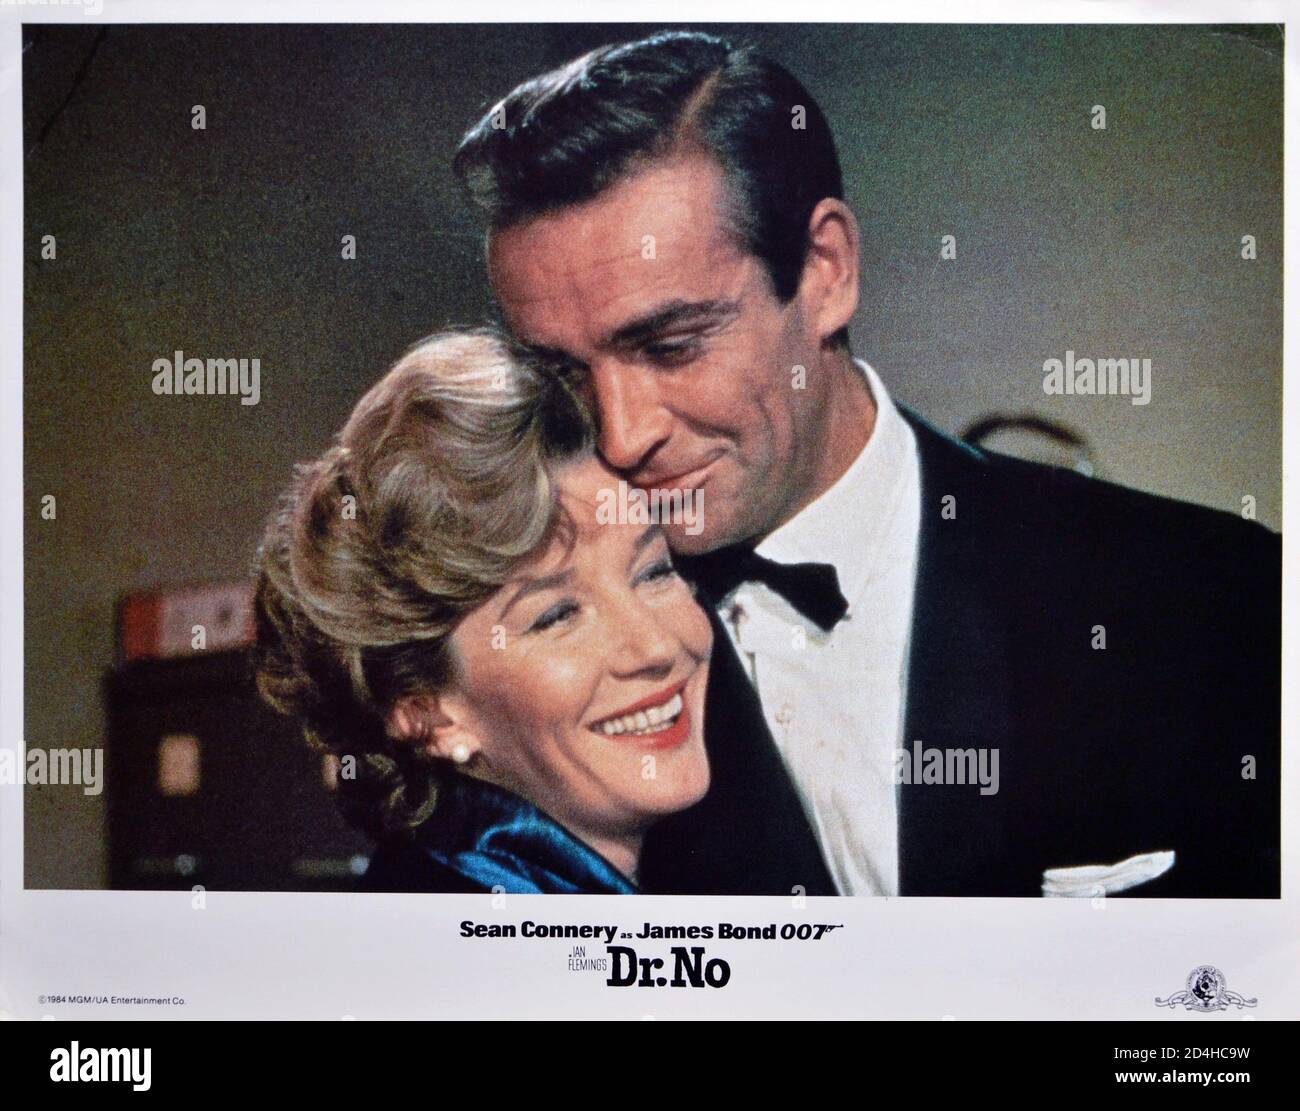 Lois Maxwell, Sean Connery, Dr. No' (1962) United Artists / File Reference # 34000-533THA Stockfoto